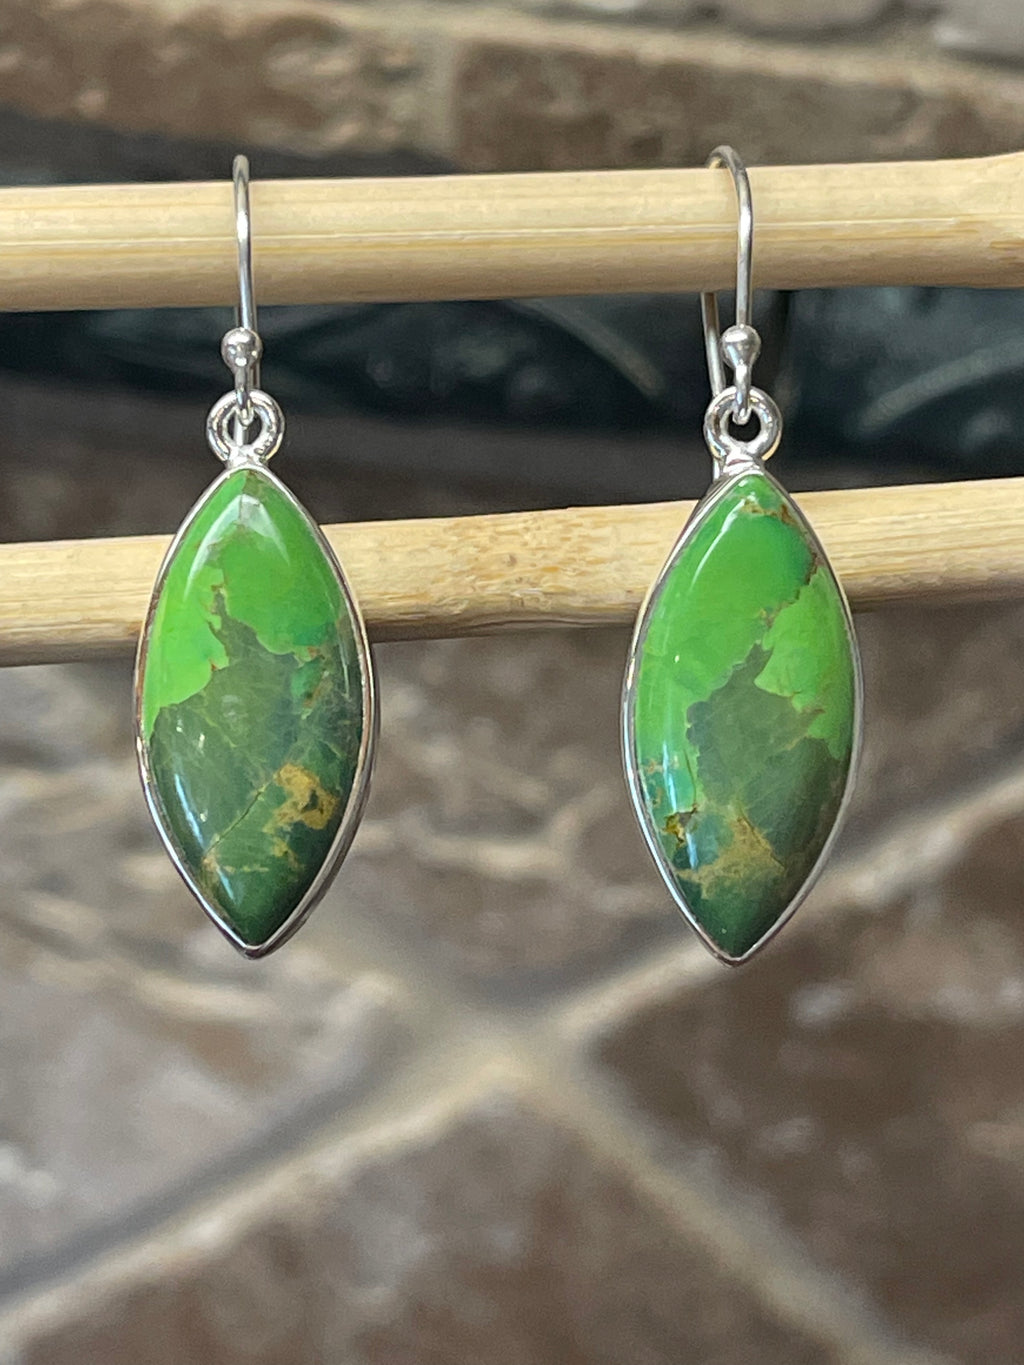 Gorgeous Green Turquoise 925 Solid Sterling Silver Earrings 40mm - Natural Rocks by Kala